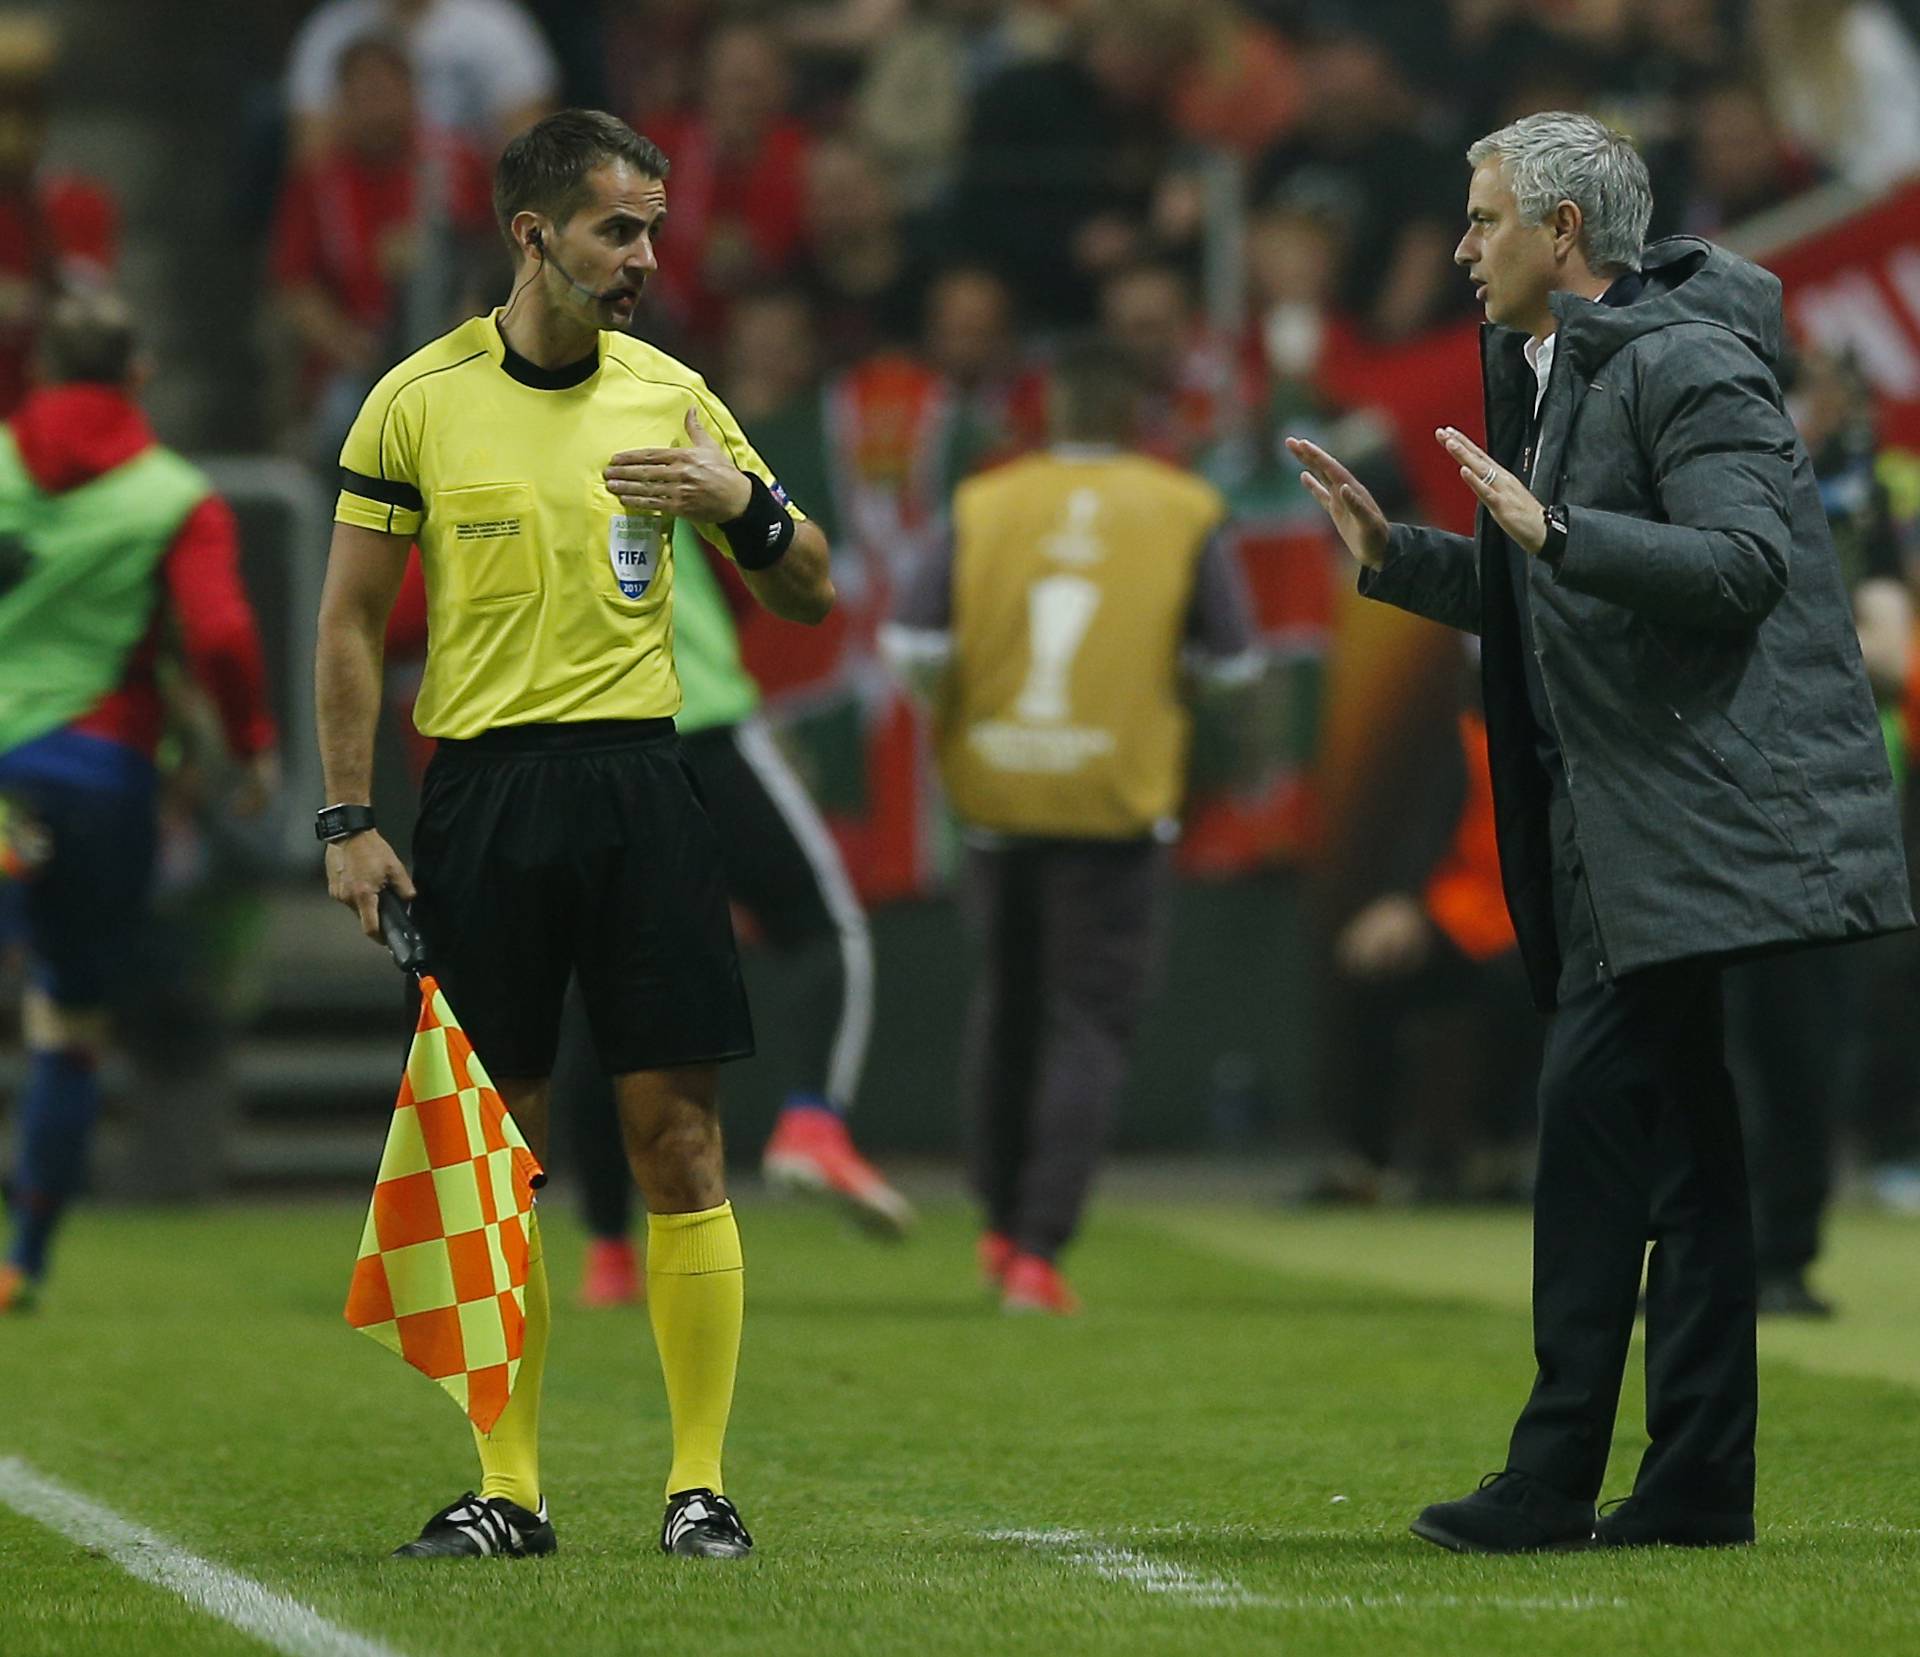 Manchester United manager Jose Mourinho with the assistant referee